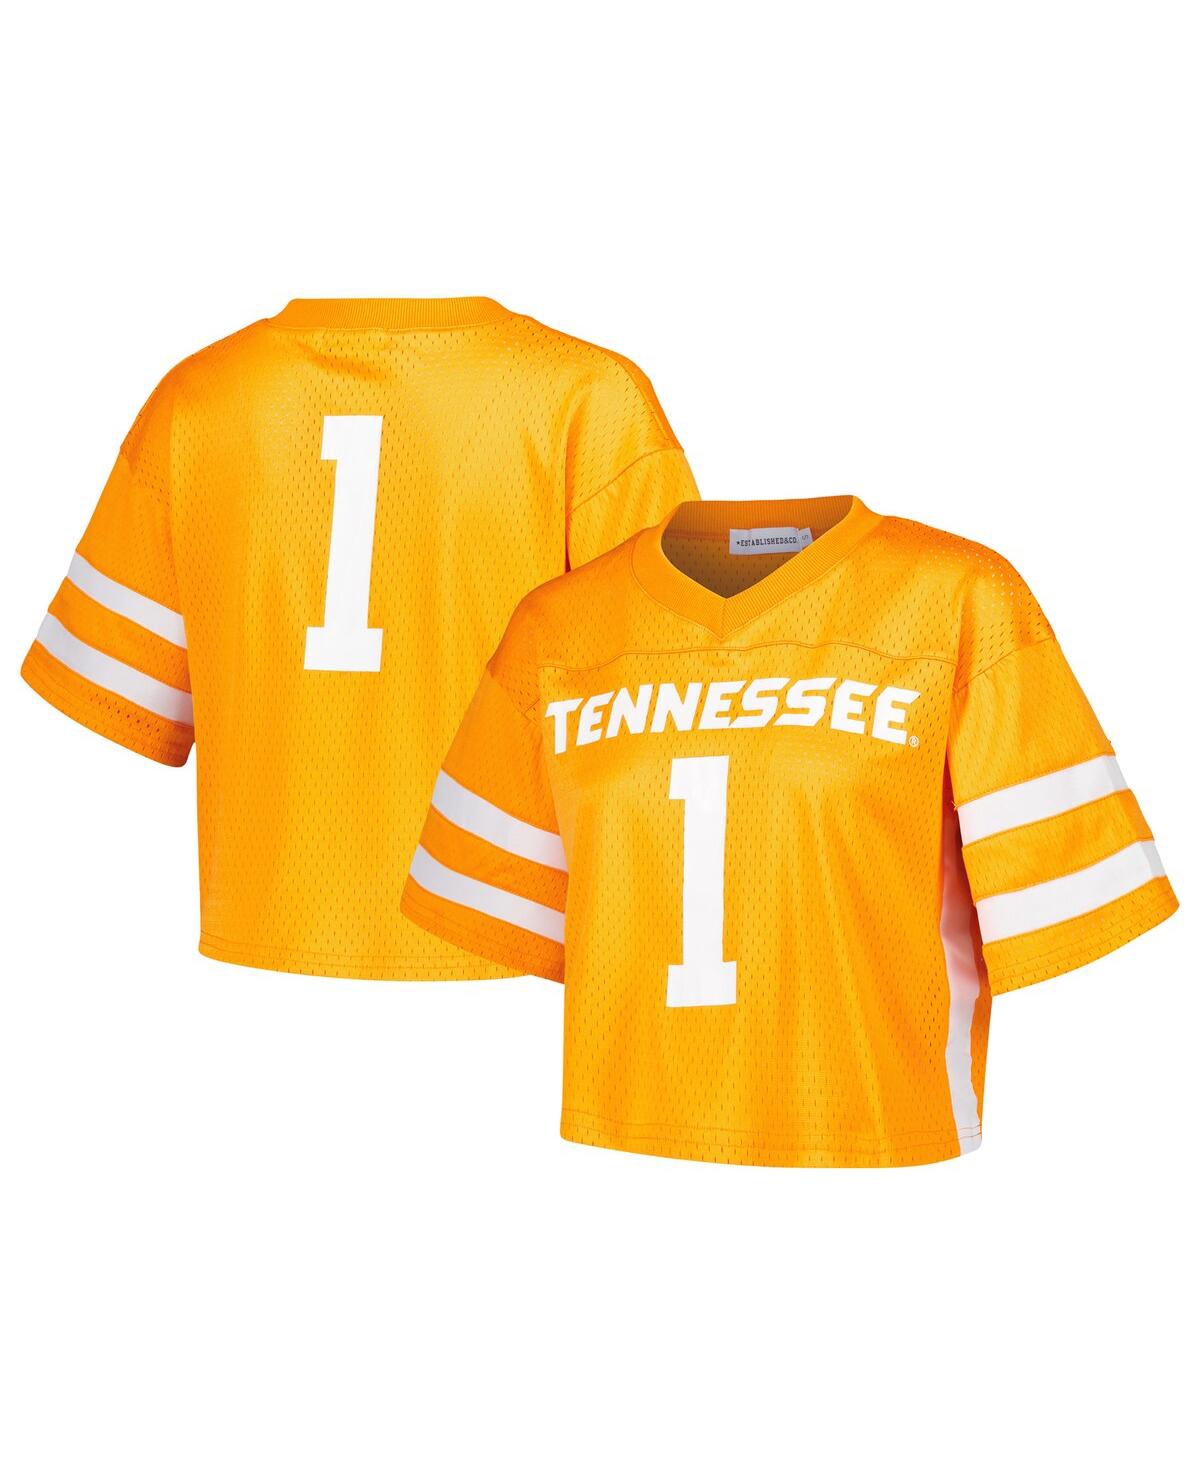 Women's Established & Co. Tennessee Orange Tennessee Volunteers Fashion Boxy Cropped Football Jersey - Tennessee Orange